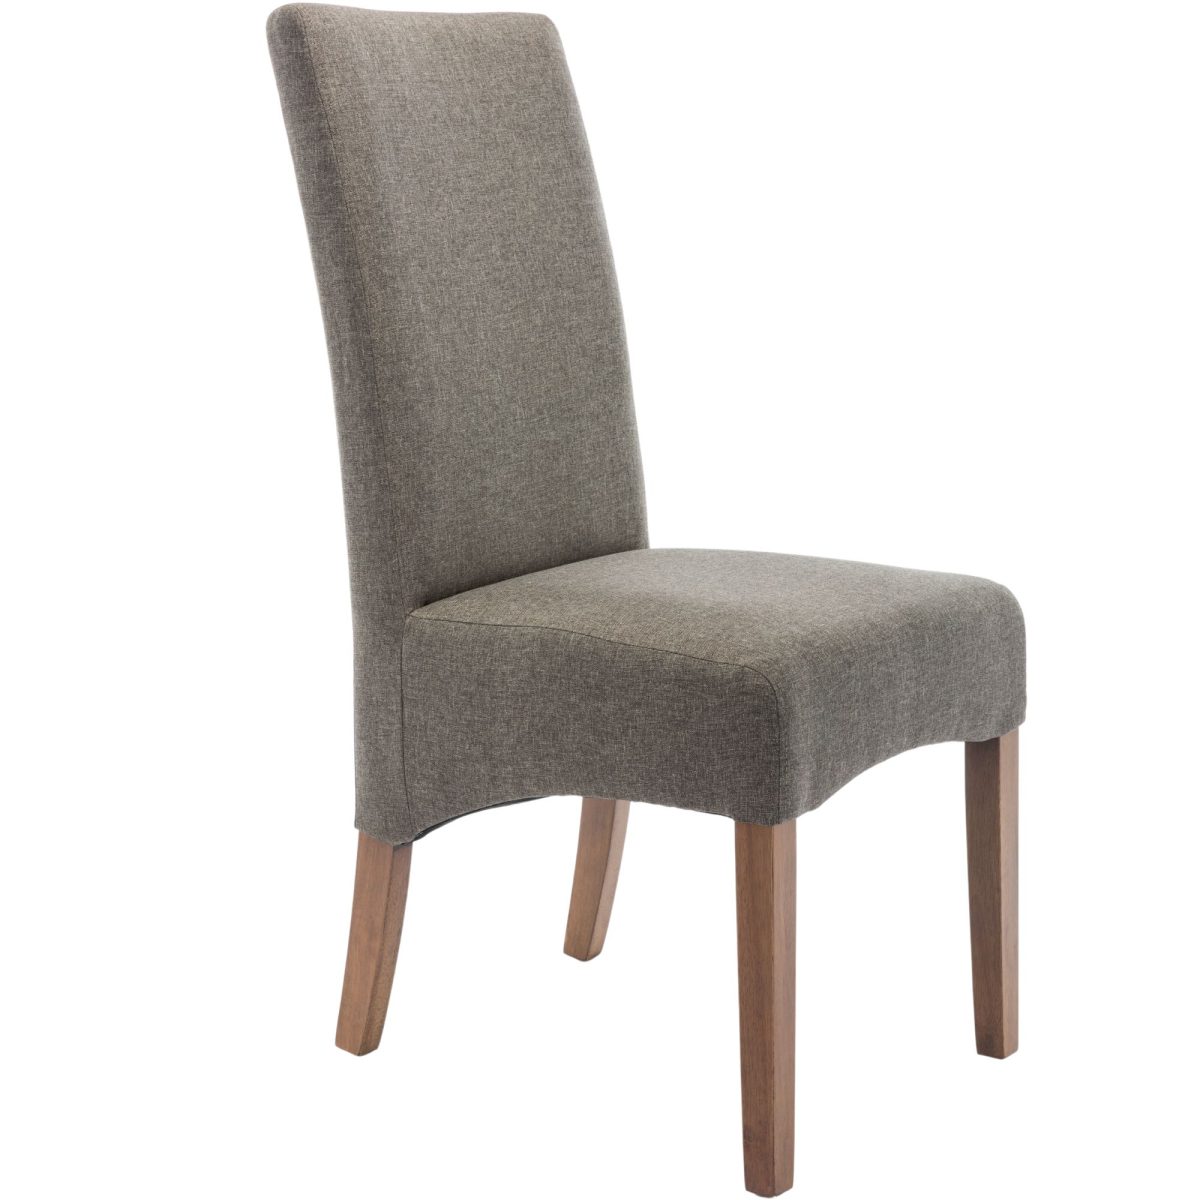 Aksa Fabric Upholstered Dining Chair Solid Pine Wood Furniture – Grey – 2